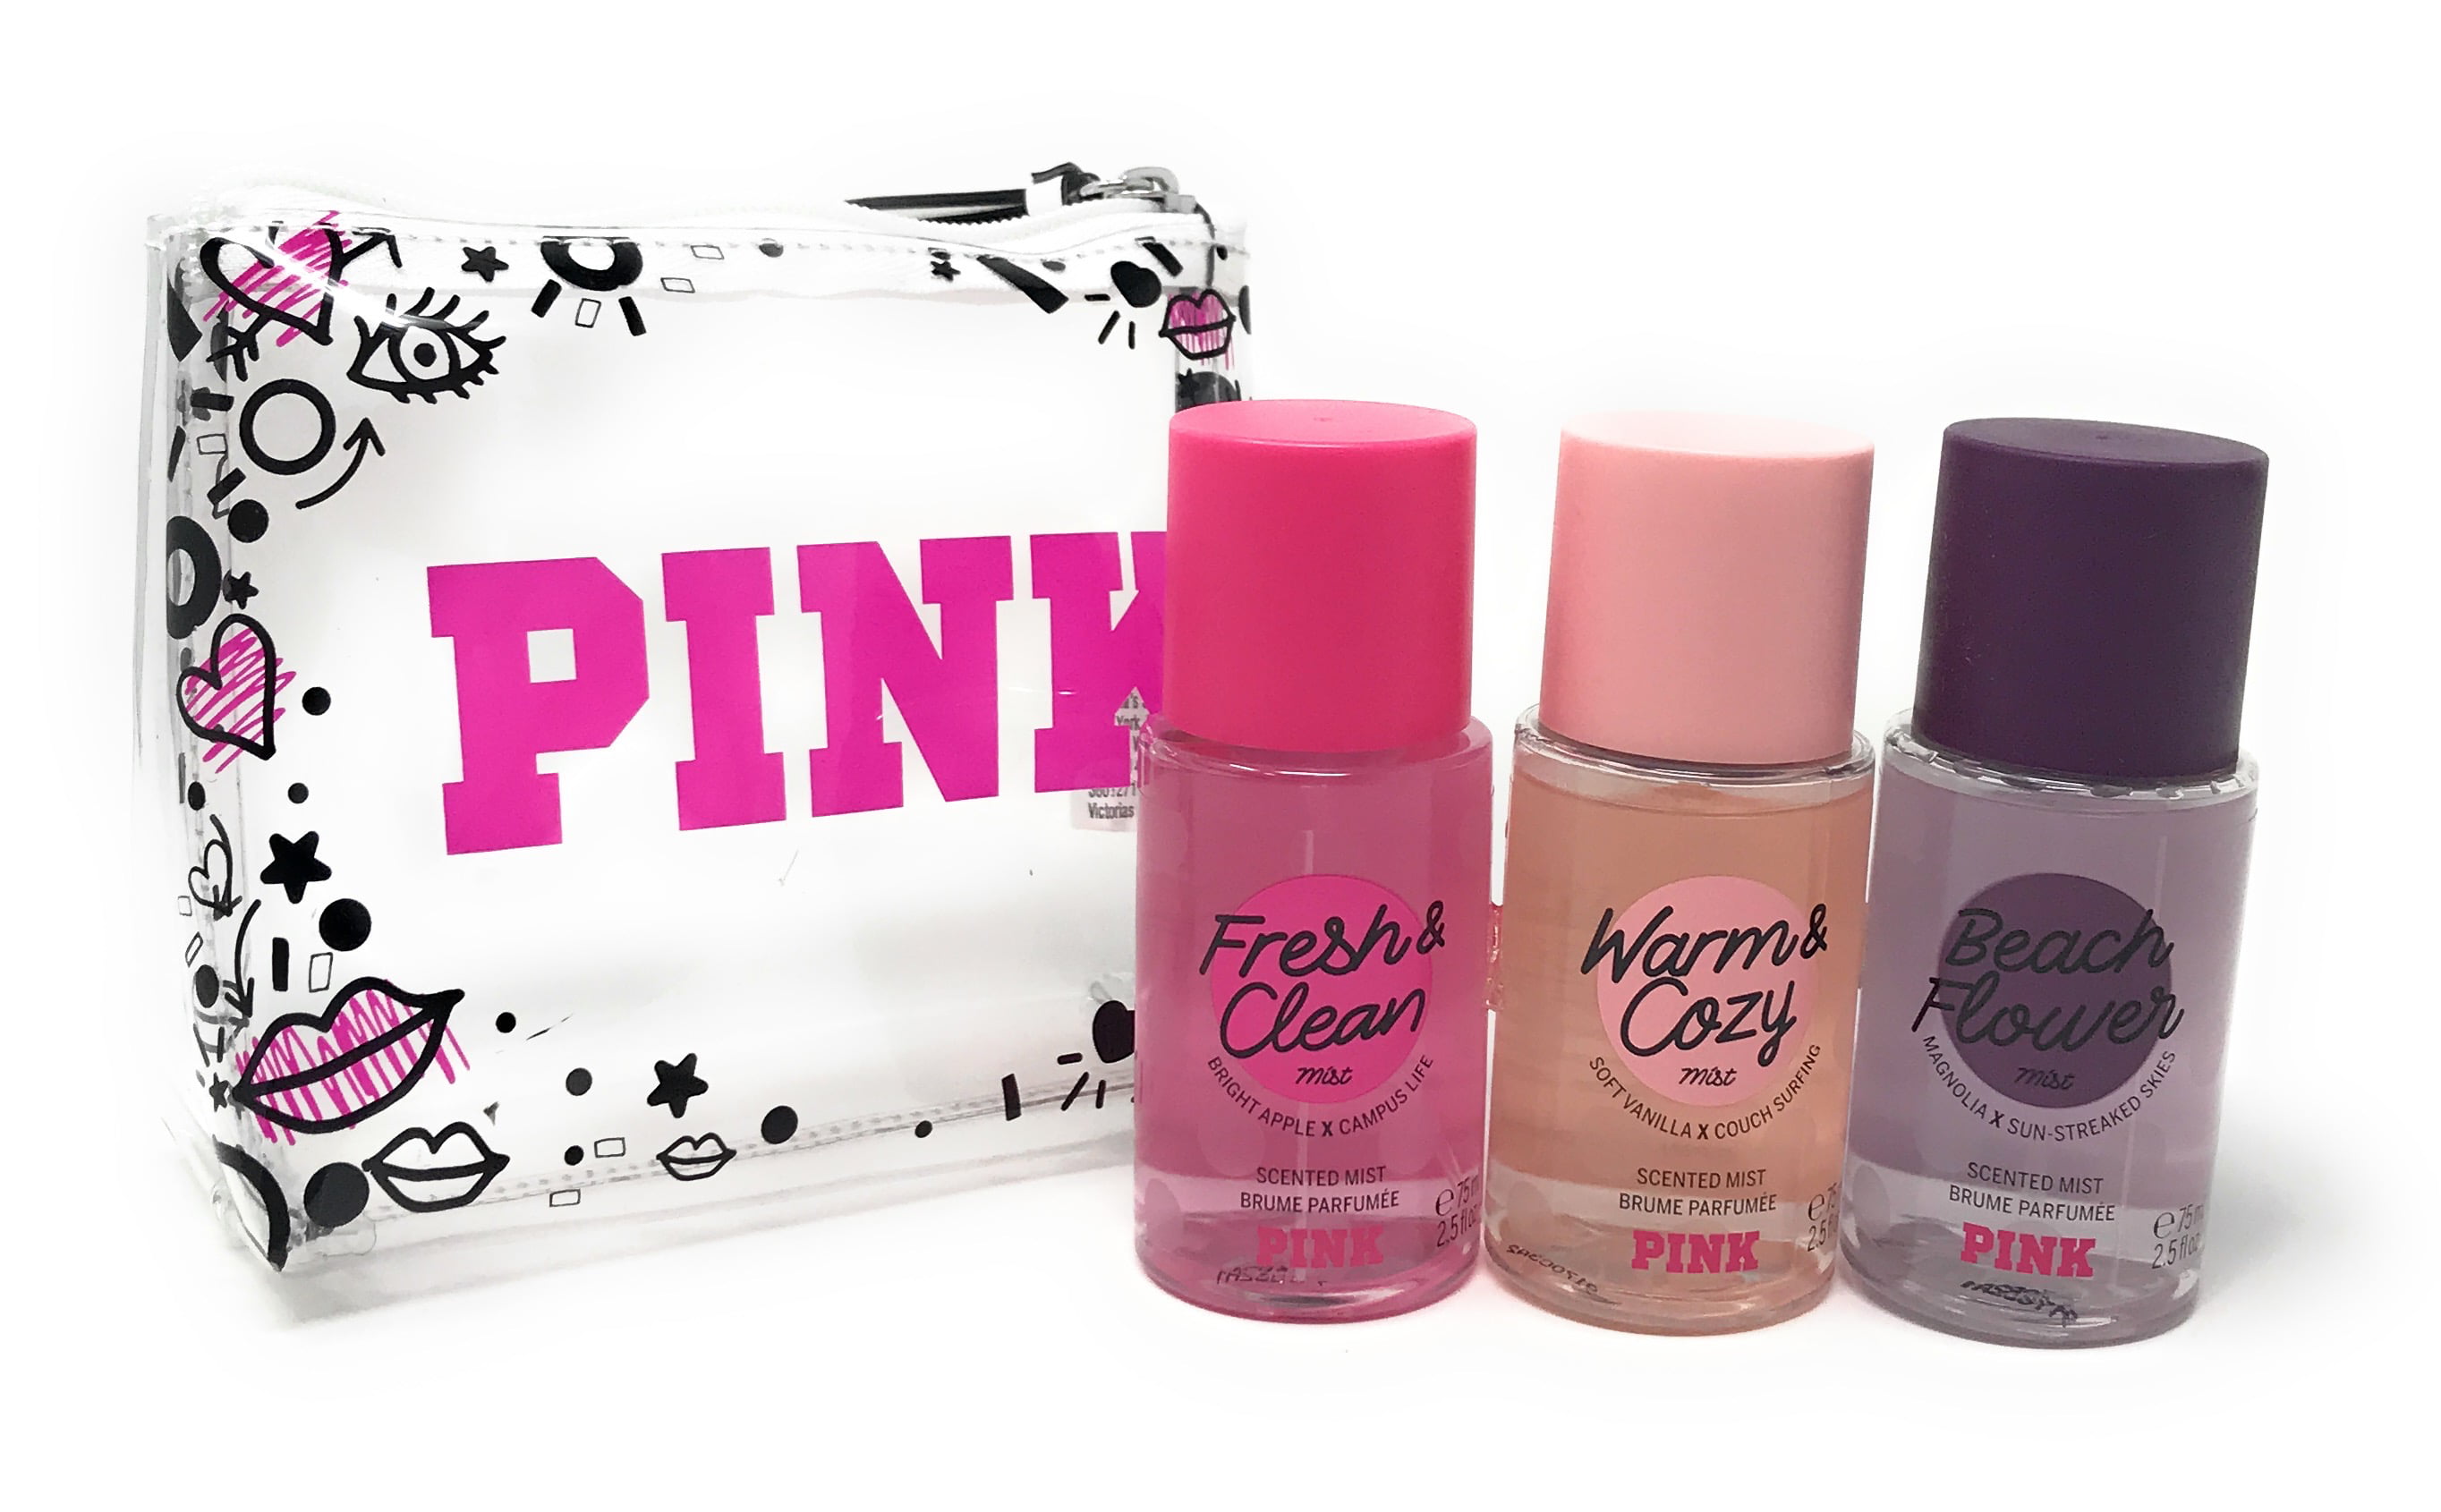 Victoria's Secret PINK Mini Body Mist Gift Set - Fresh and Clean, Warm and  Cozy, Beach Flower 